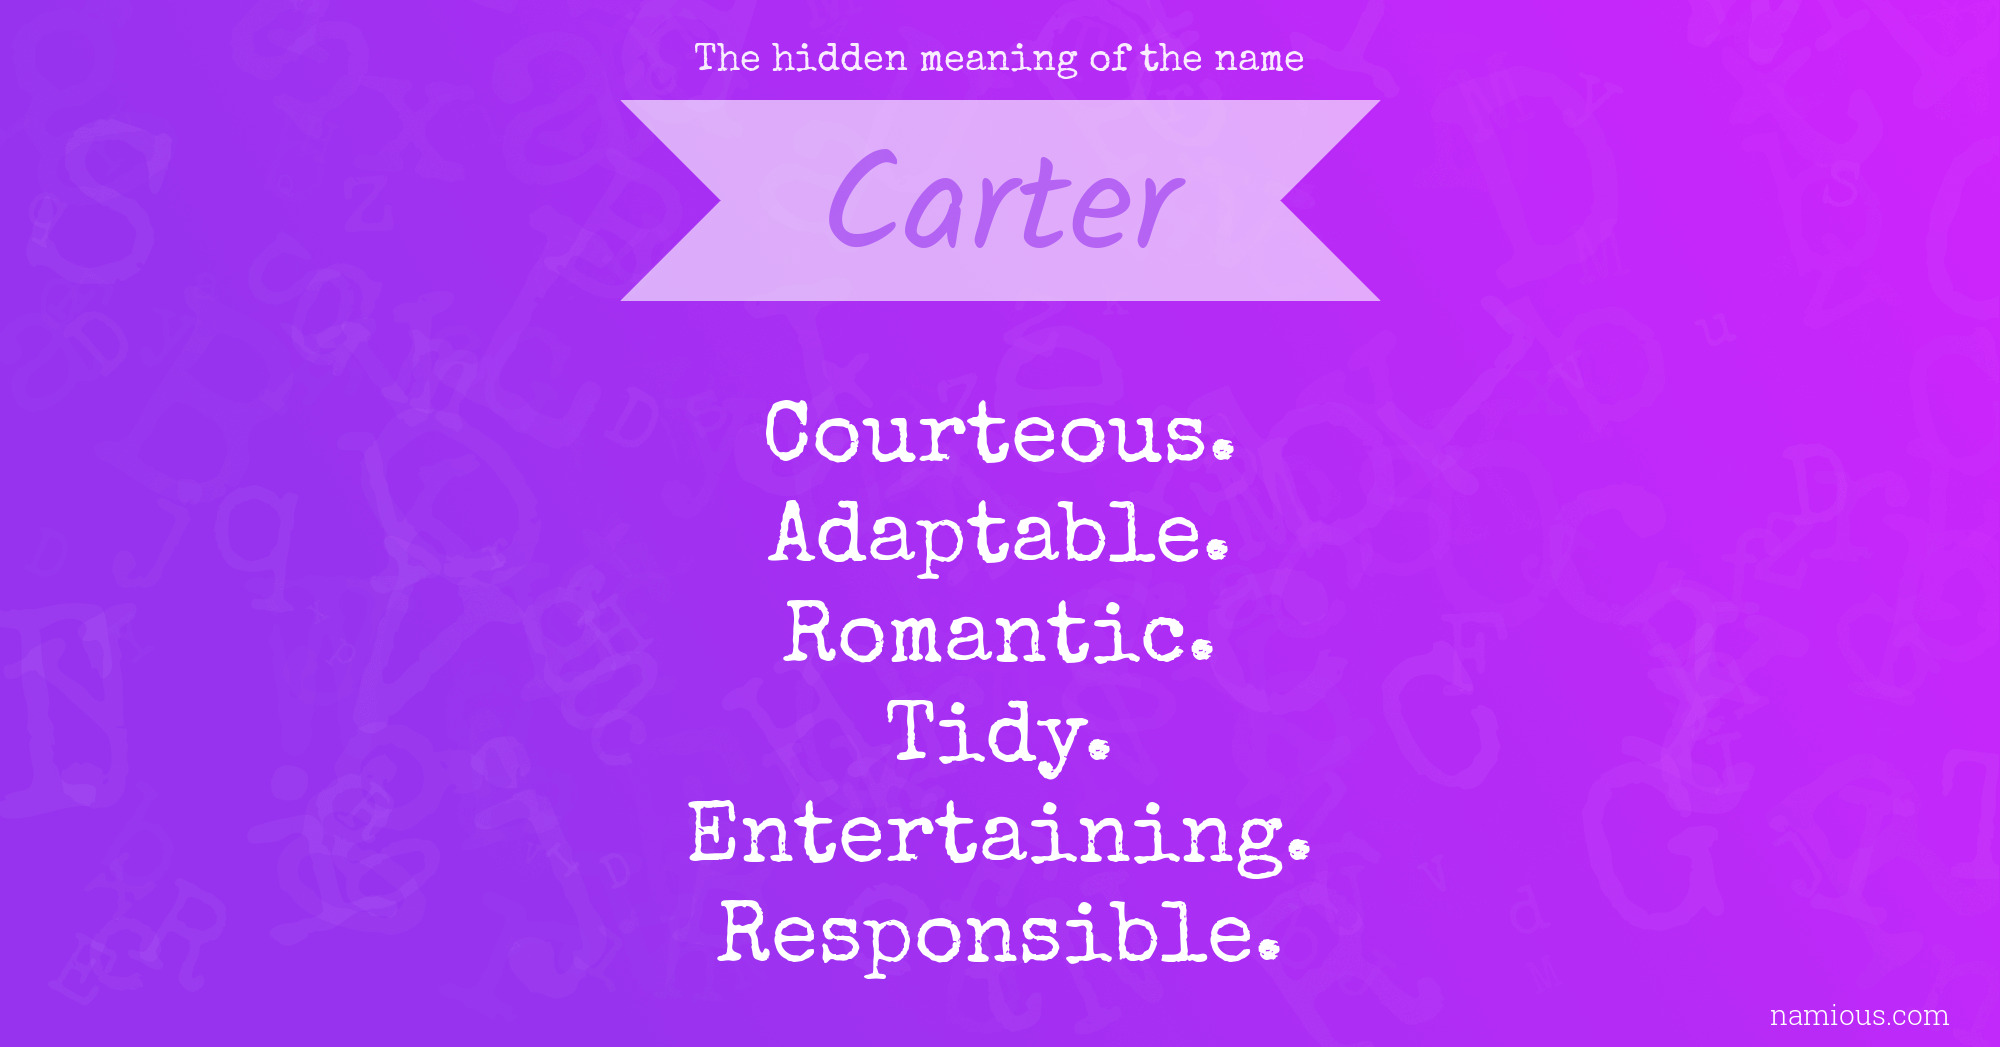 The hidden meaning of the name Carter